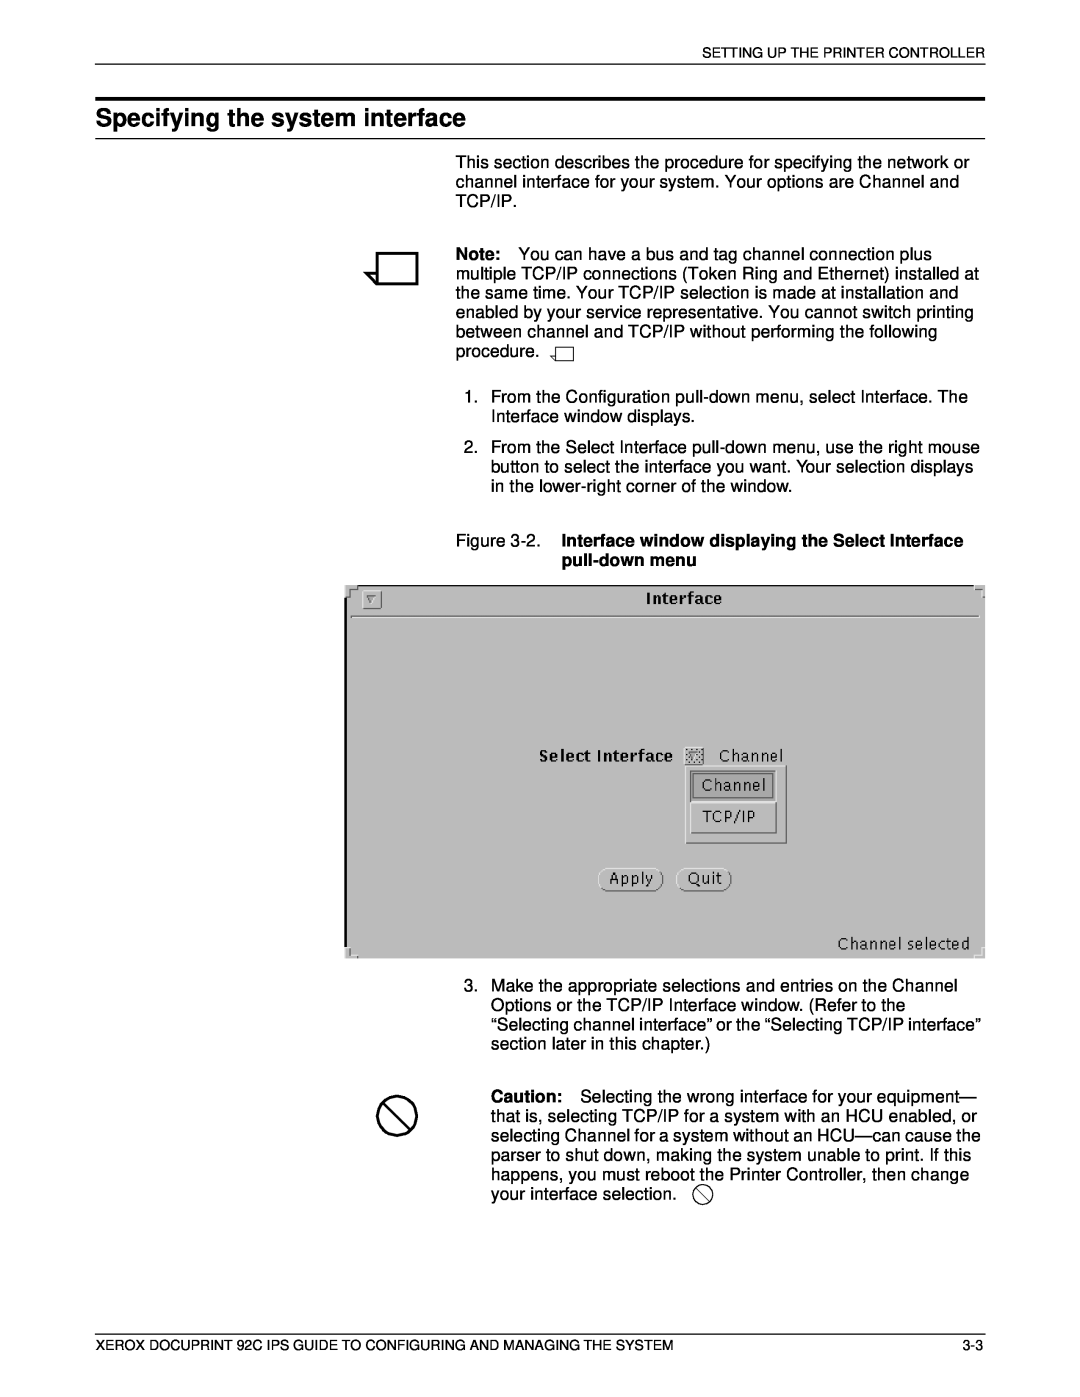 Xerox 92C IPS manual Specifying the system interface 